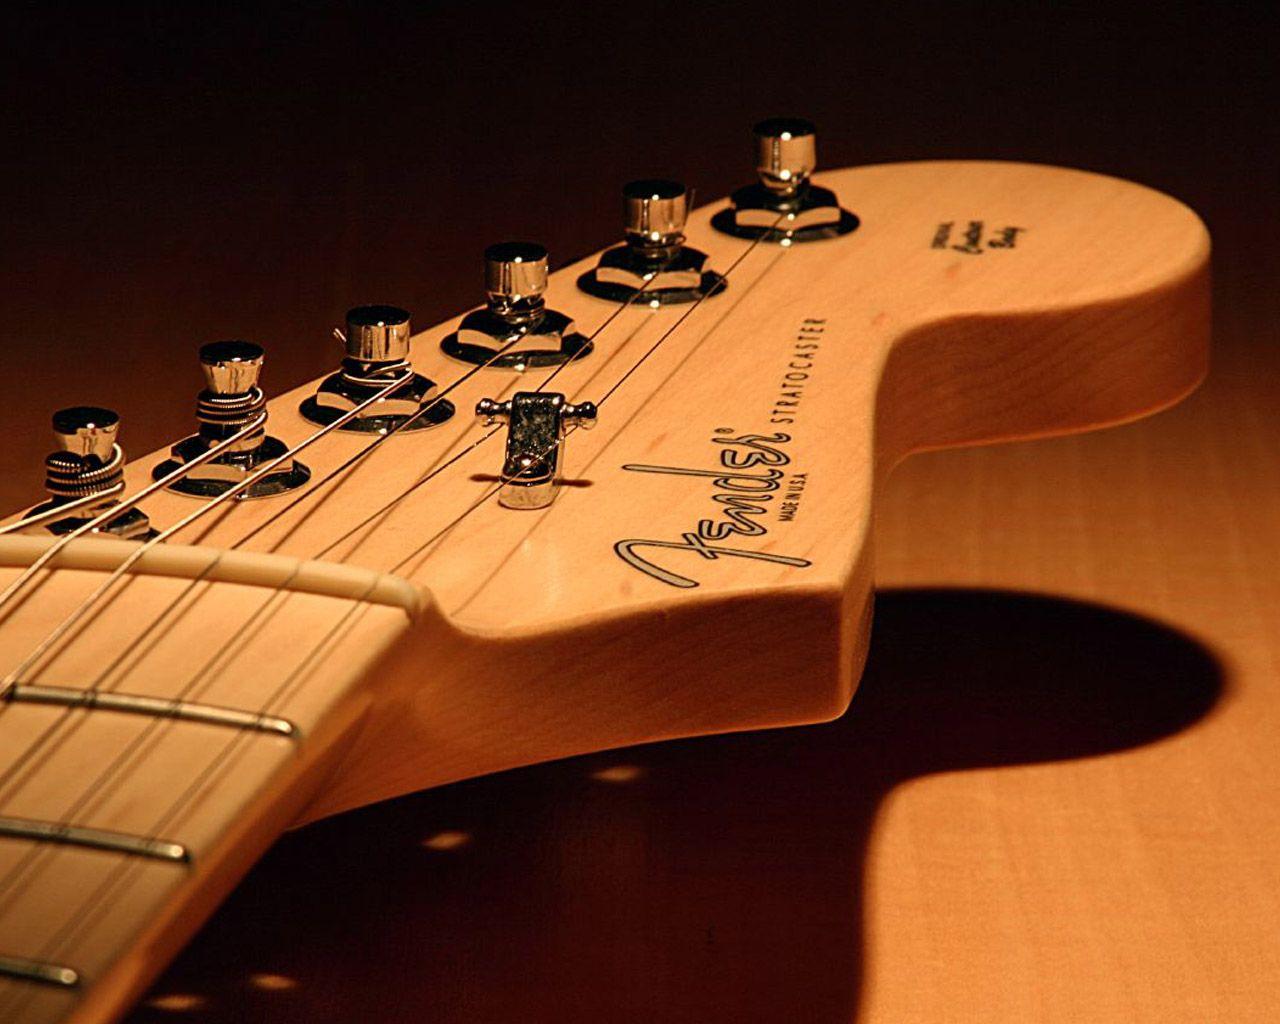 Fender Stratocaster Wallpaper and Background Imagex1024